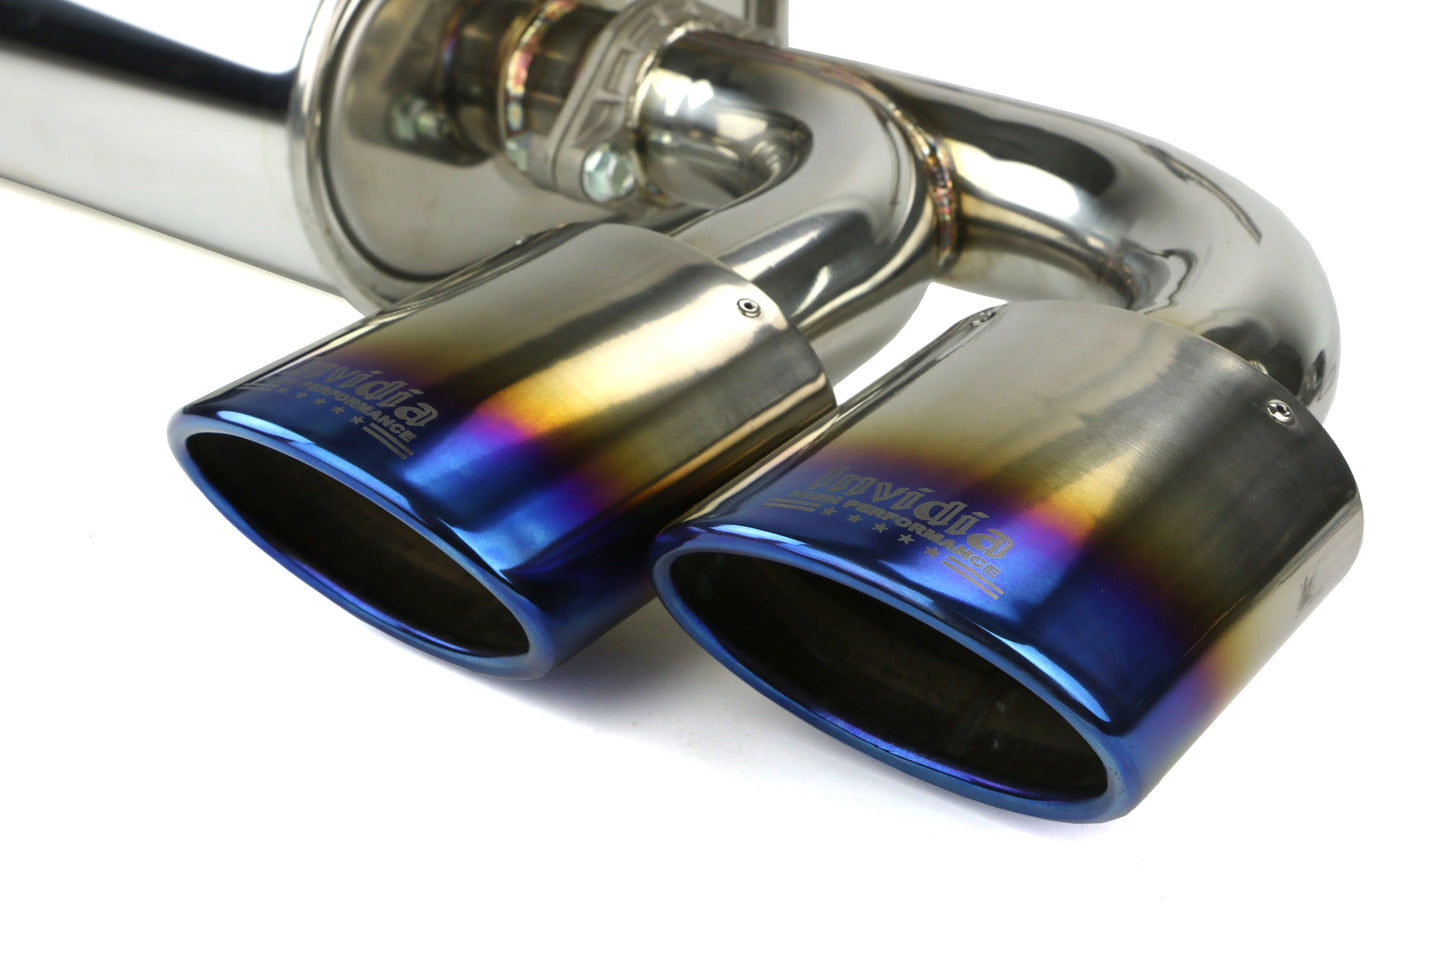 Q300 Non-Valved Catback Exhaust w/Oval Tips - VW Golf R Mk7